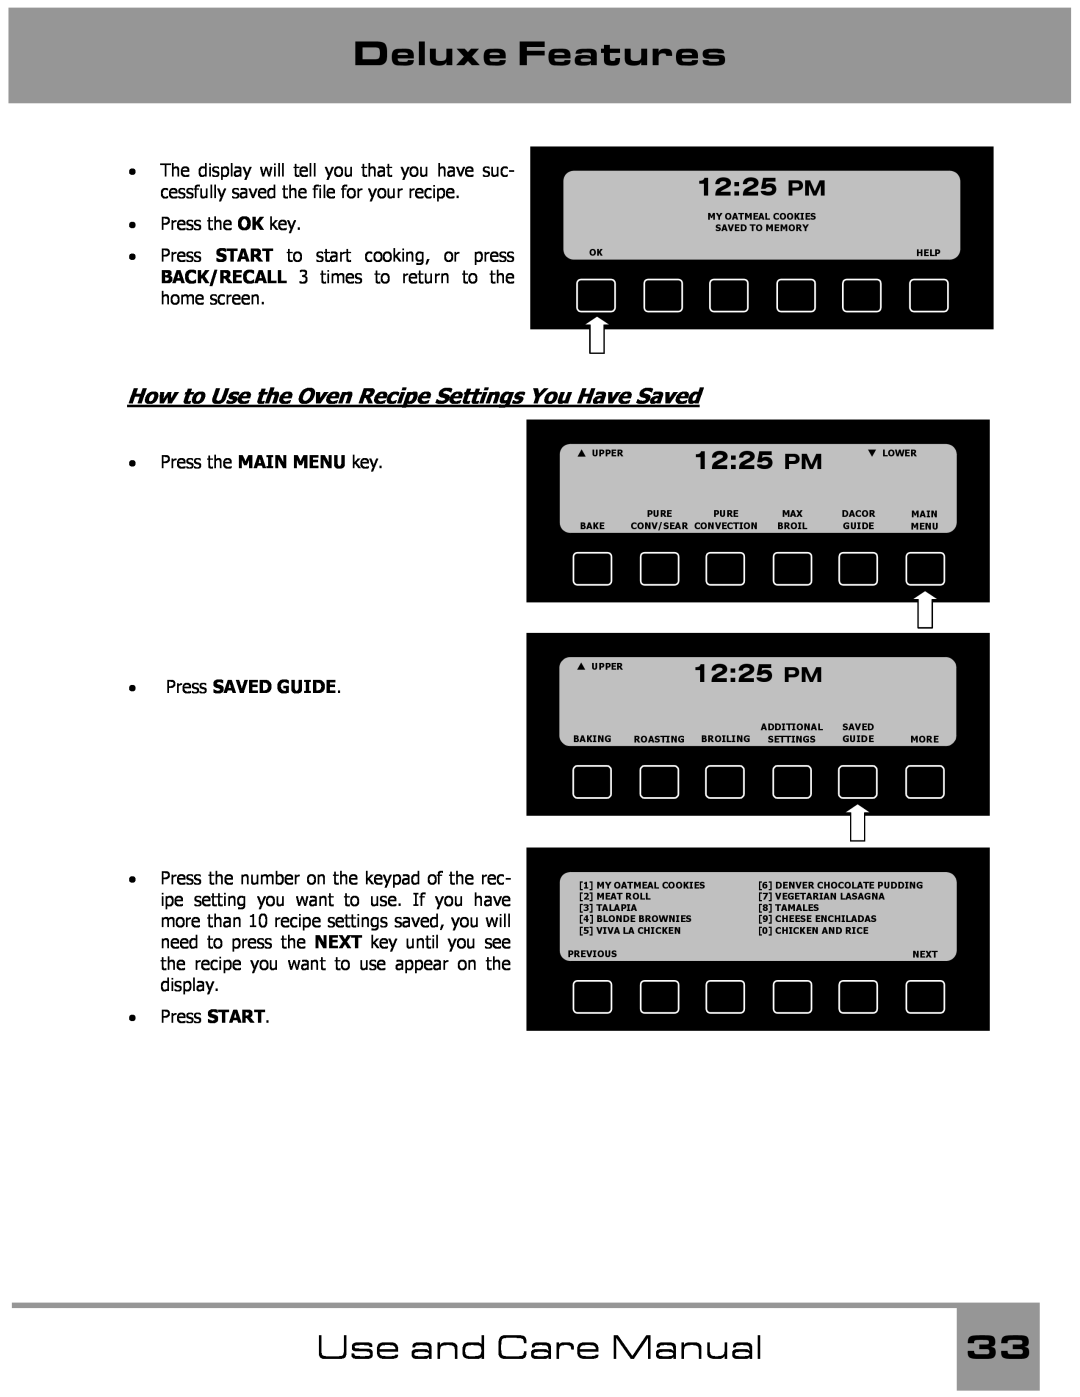 Dacor Wall Oven manual How to Use the Oven Recipe Settings You Have Saved, Deluxe Features, Use and Care Manual, 1225 PM 